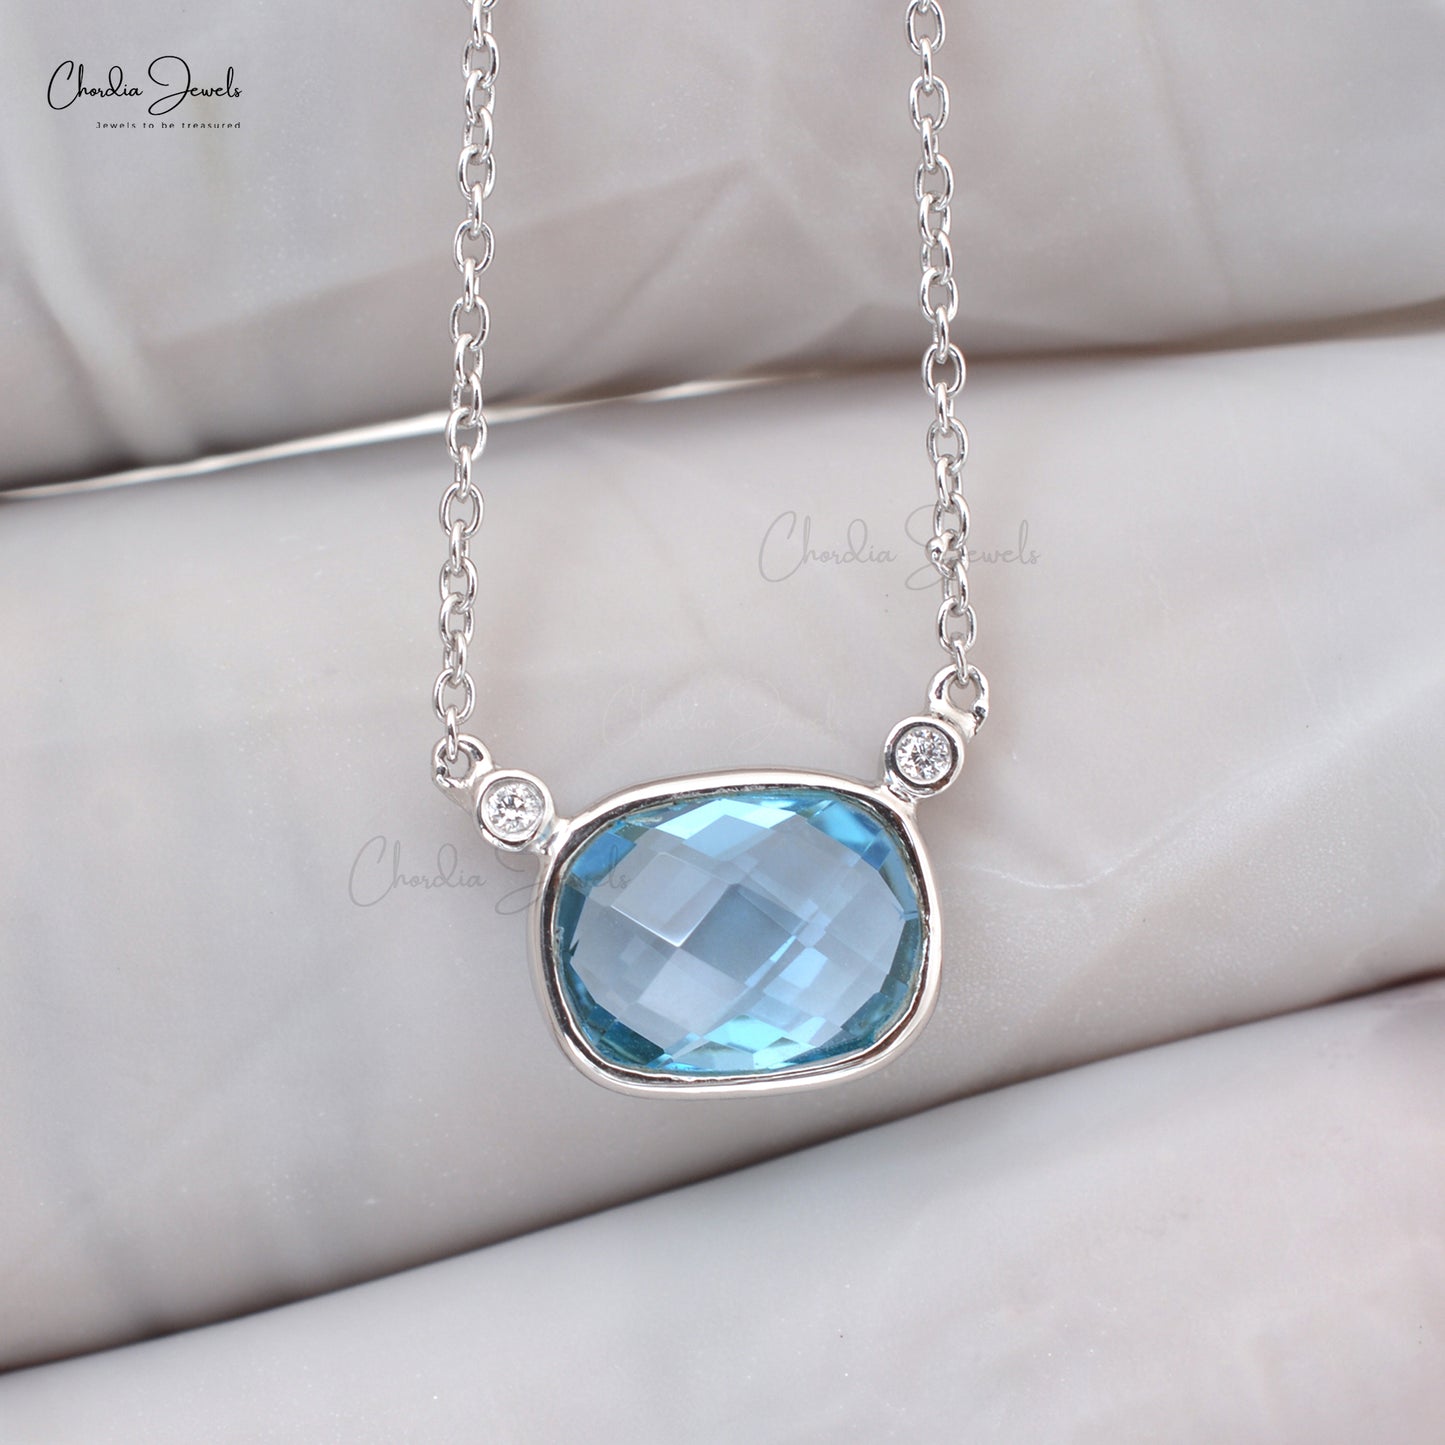 Swiss Blue Topaz and Diamond 16 Inches Necklace 8x6mm Recta Cushion Cut Gemstone Jewelry 14k Solid White Gold Necklace